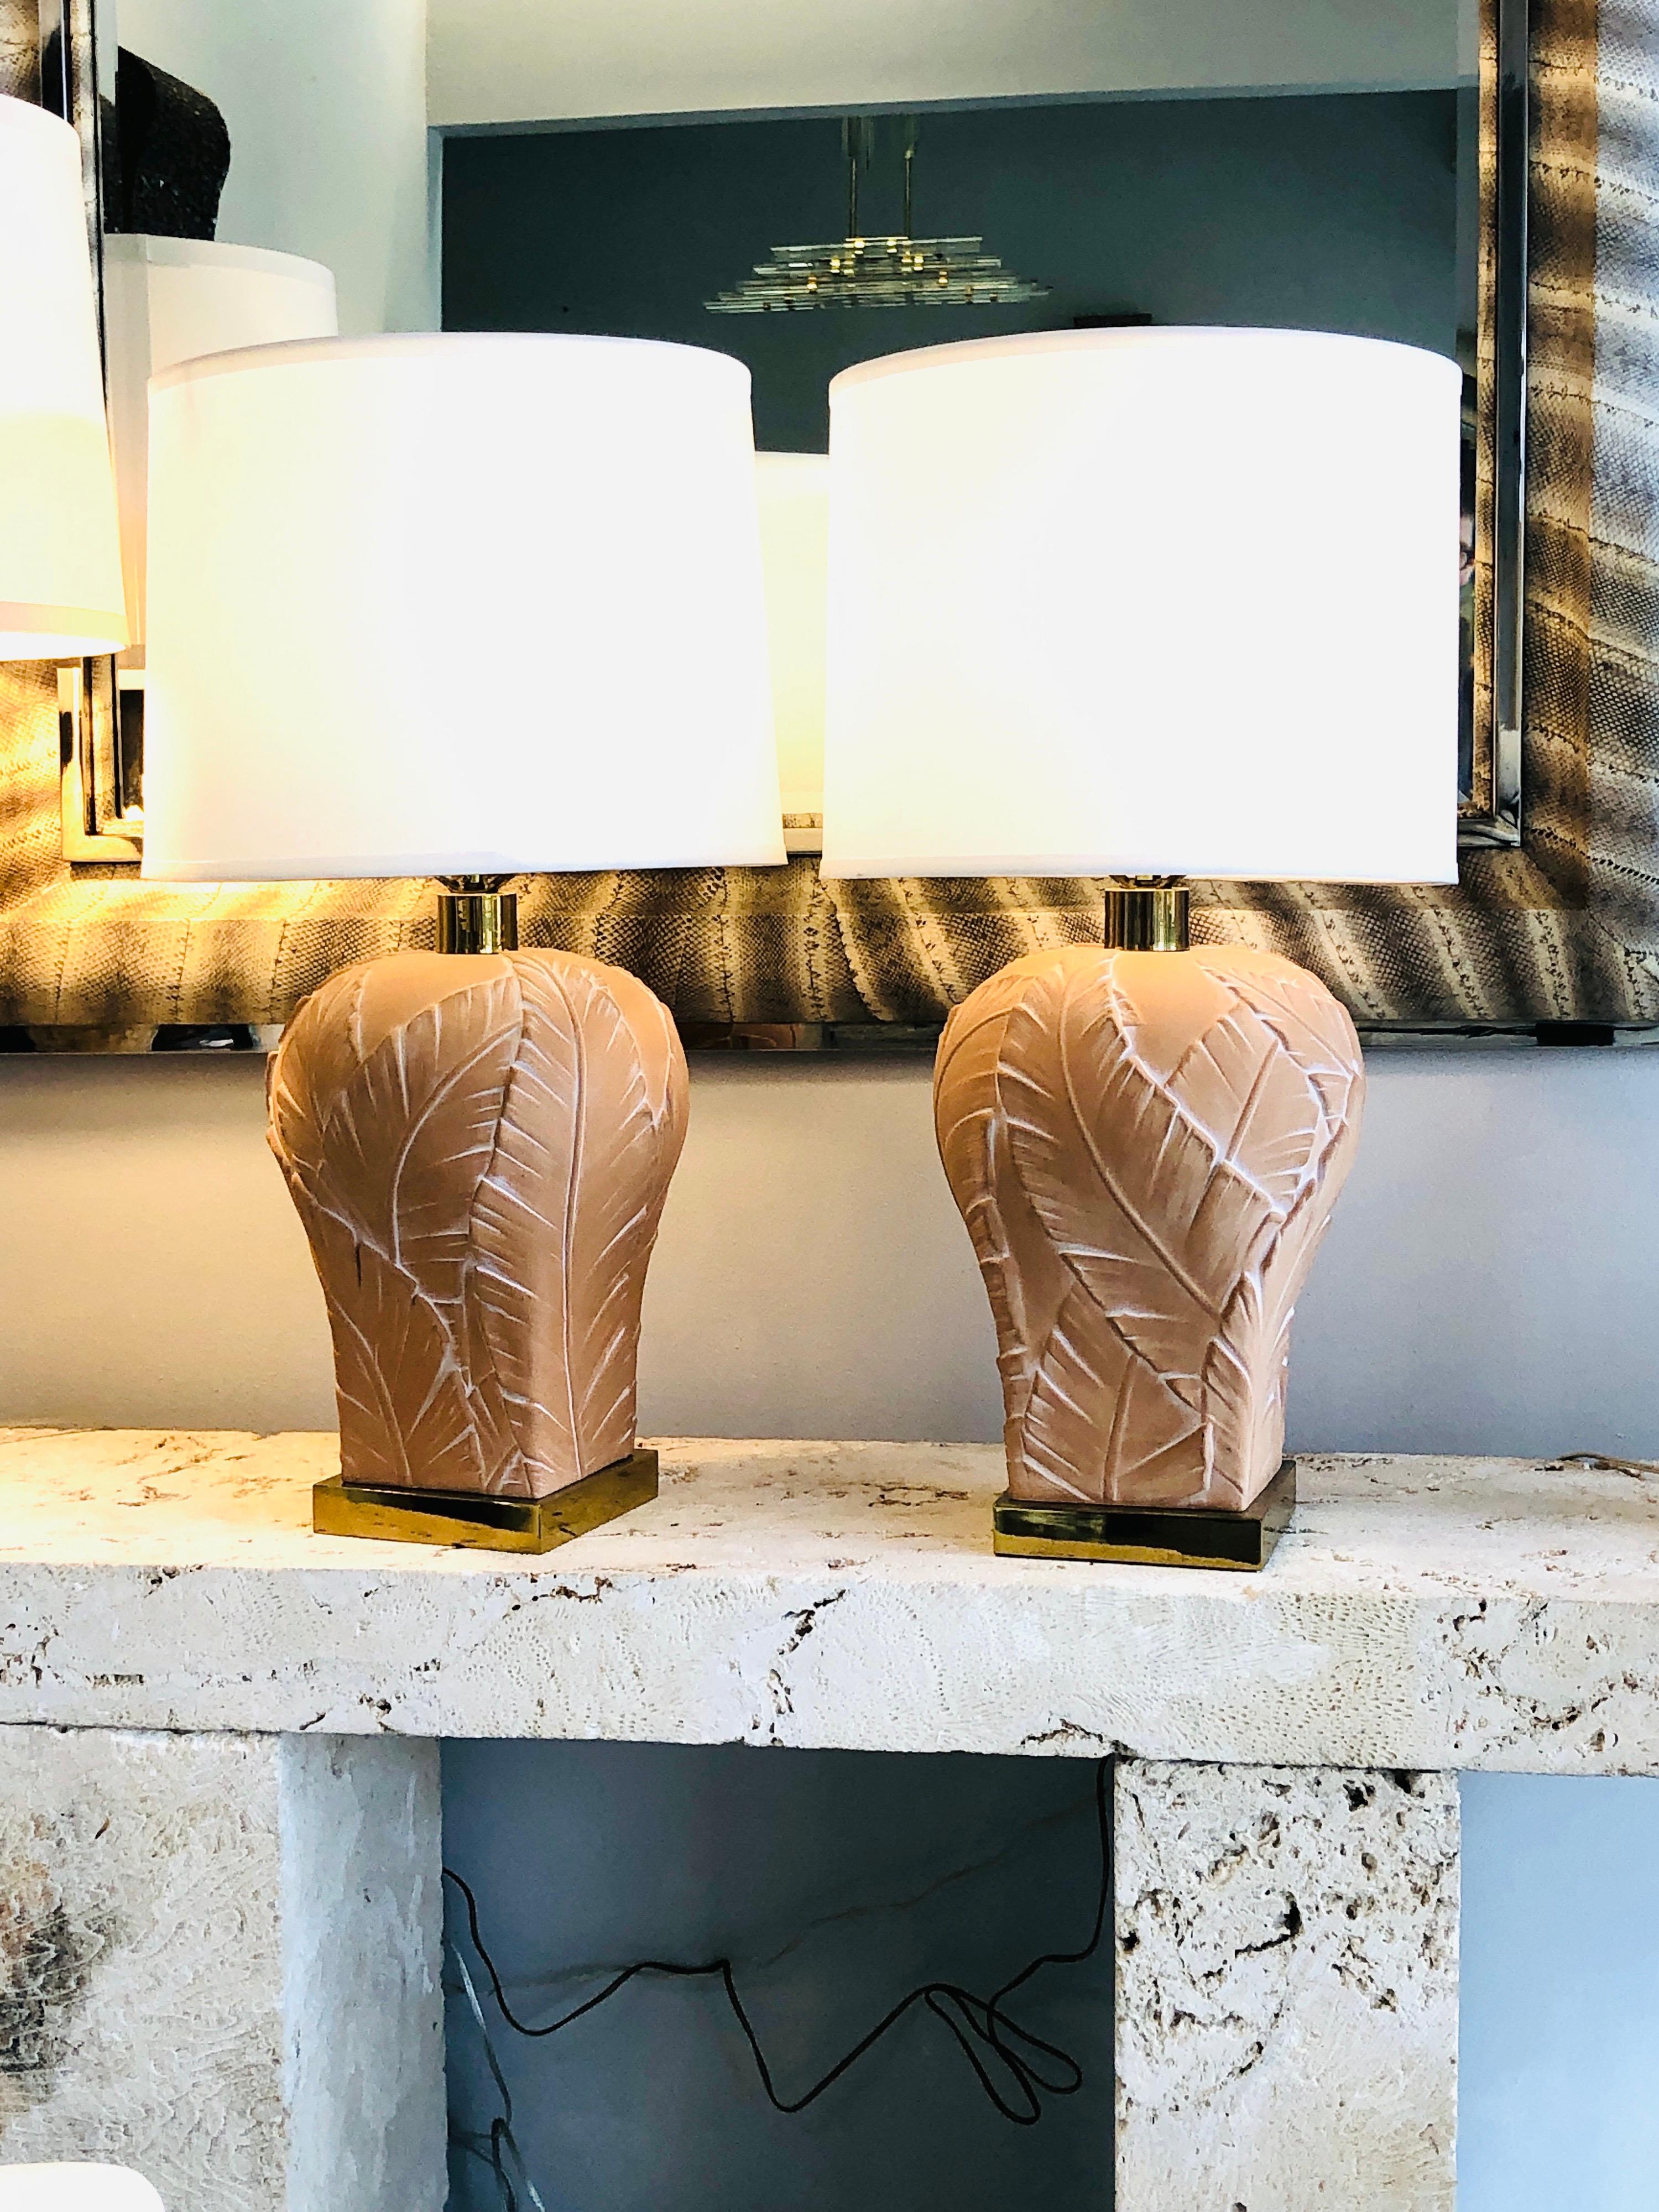 Super chic pair of lamps by Paul Hanson. The large leaves wrap around the whole body. Brass hardware. Diameter of the body is 11